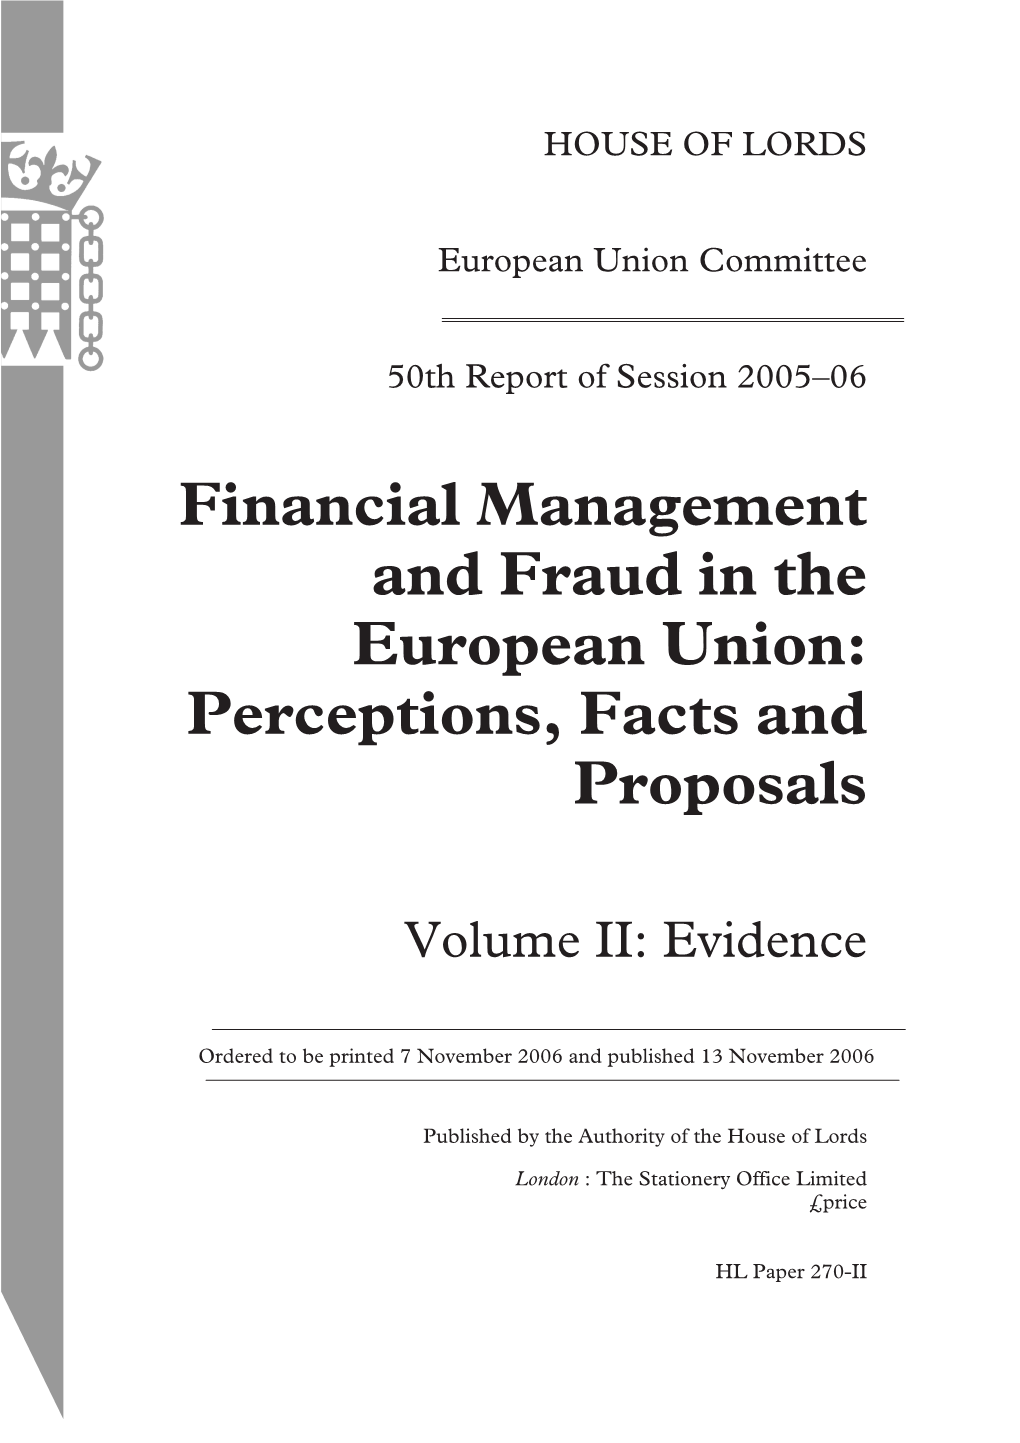 Financial Management and Fraud in the European Union: Perceptions, Facts and Proposals